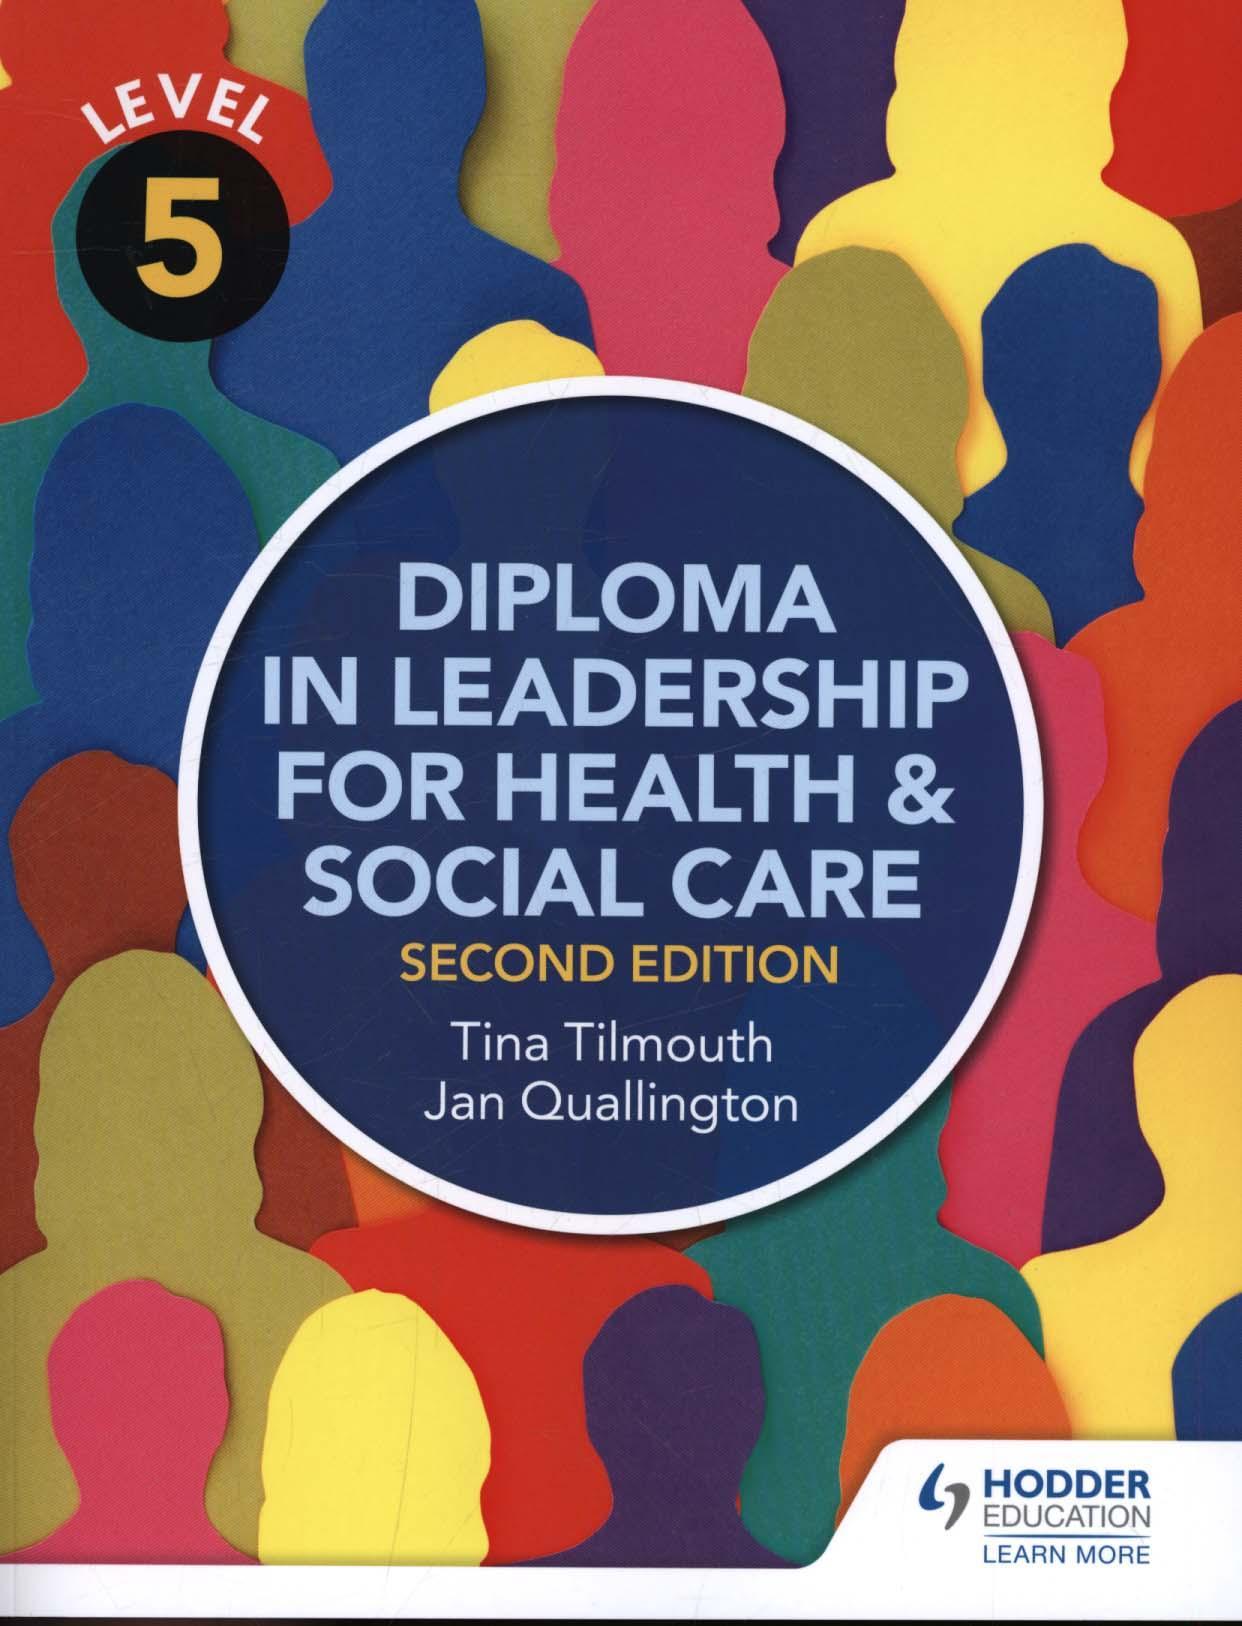 Level 5 Diploma in Leadership for Health and Social Care